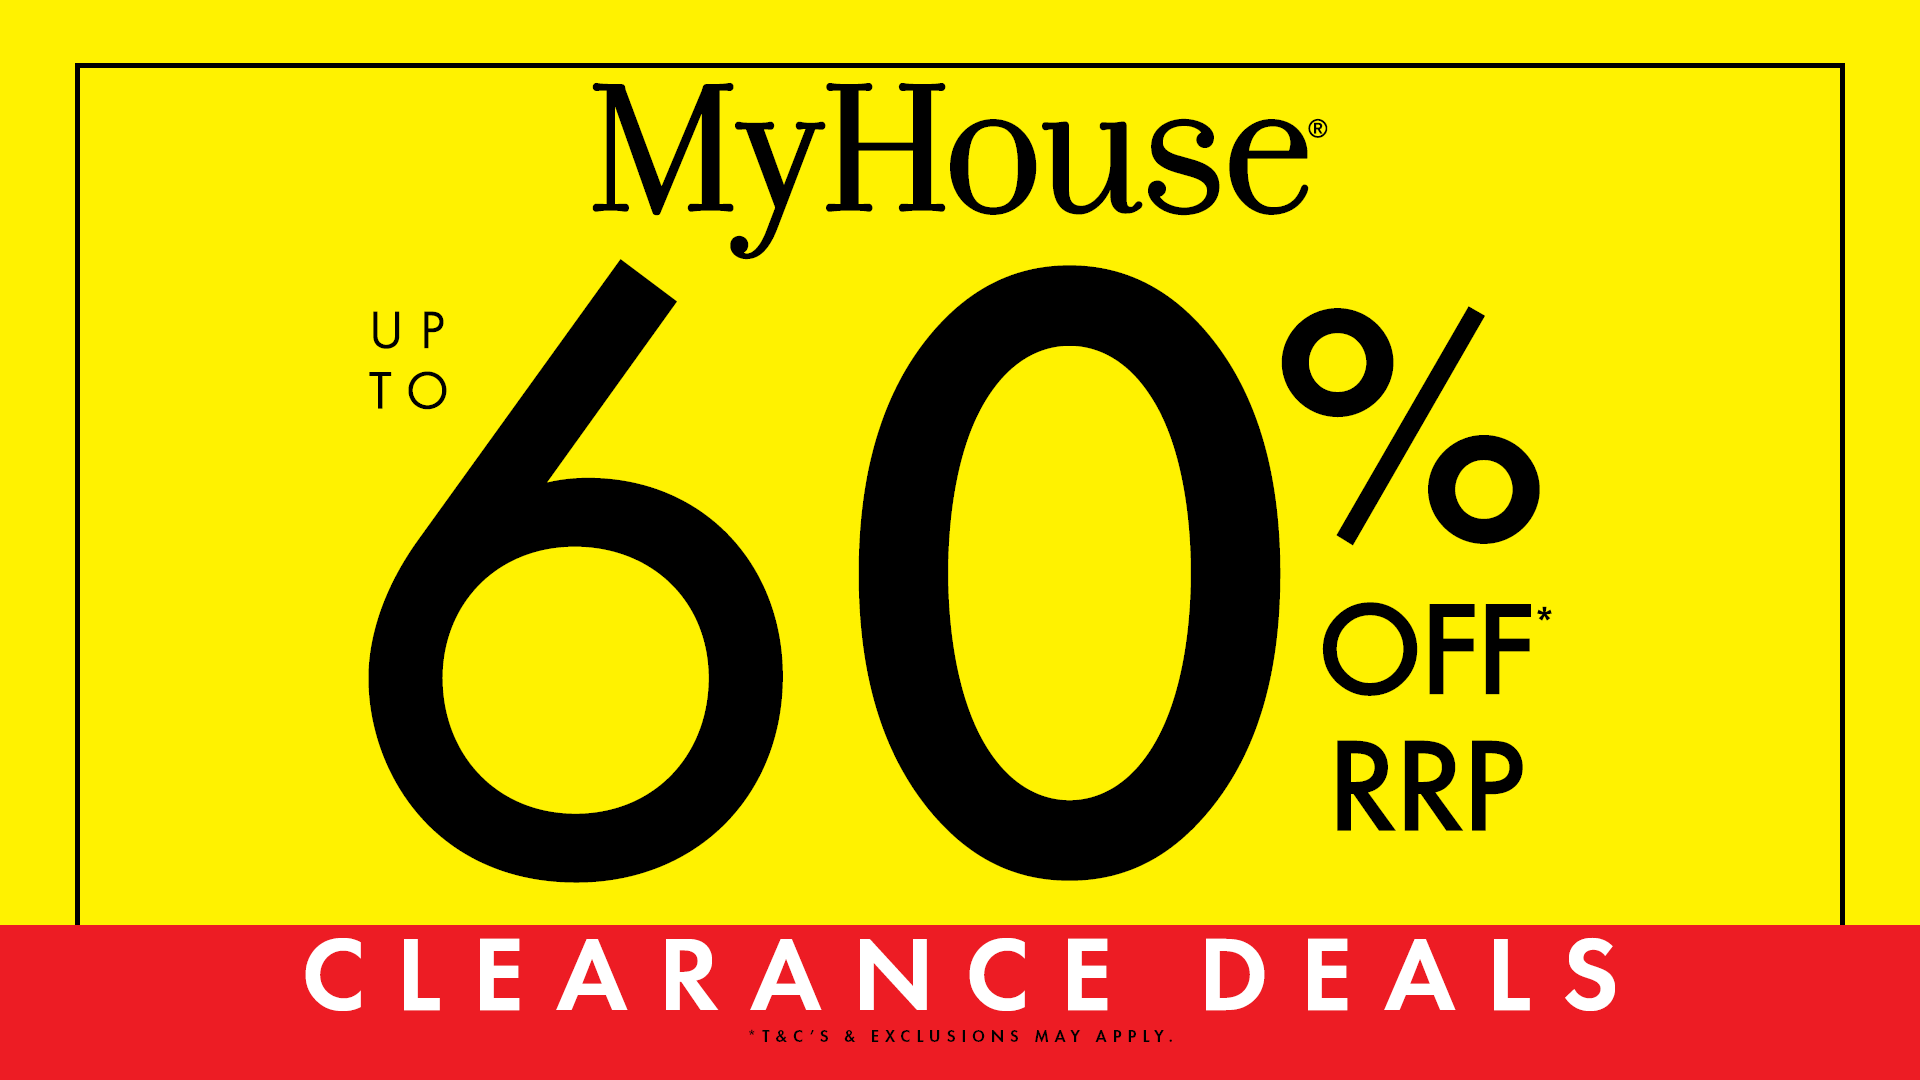 Save up to 70 OFF during our 25 MILLION OVERSTOCK CLEARANCE SALE